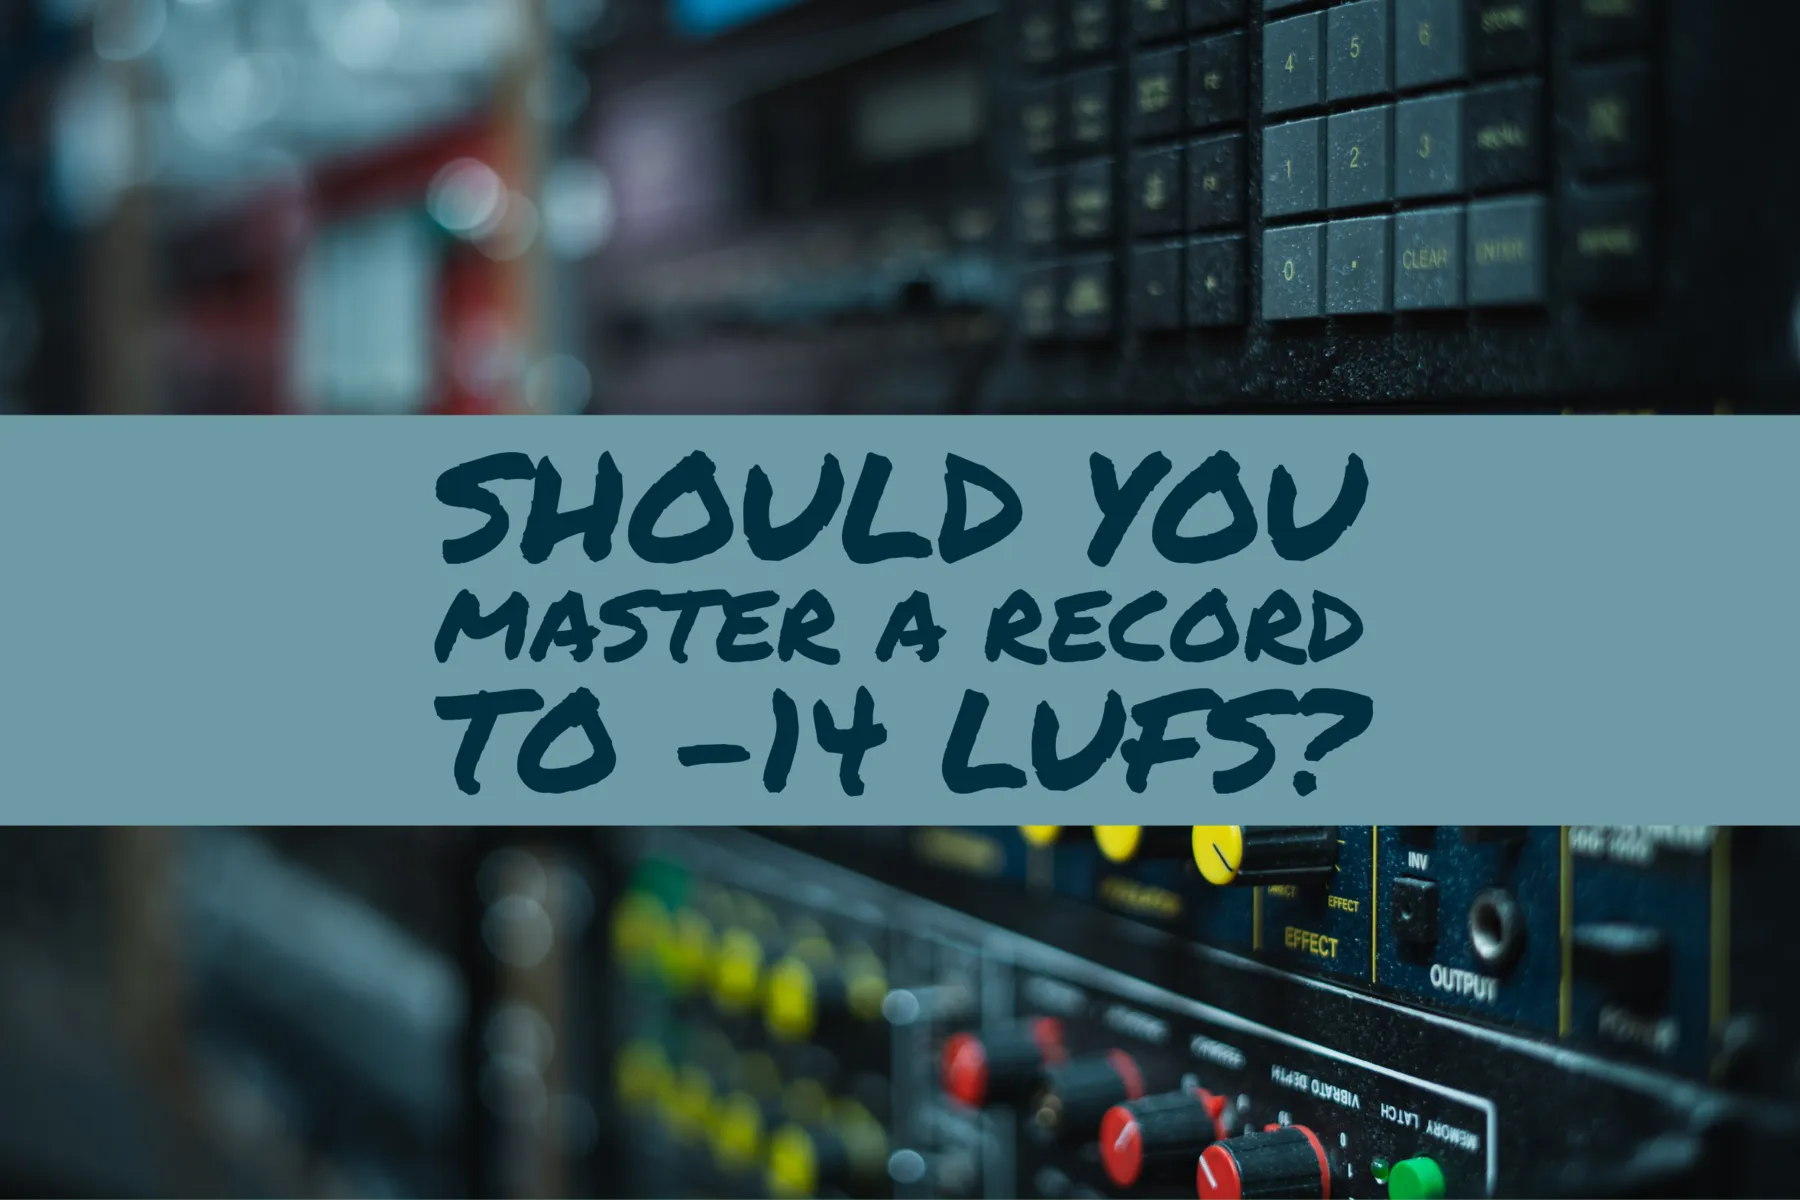 Should You Master Your Records to -14 LUFS?